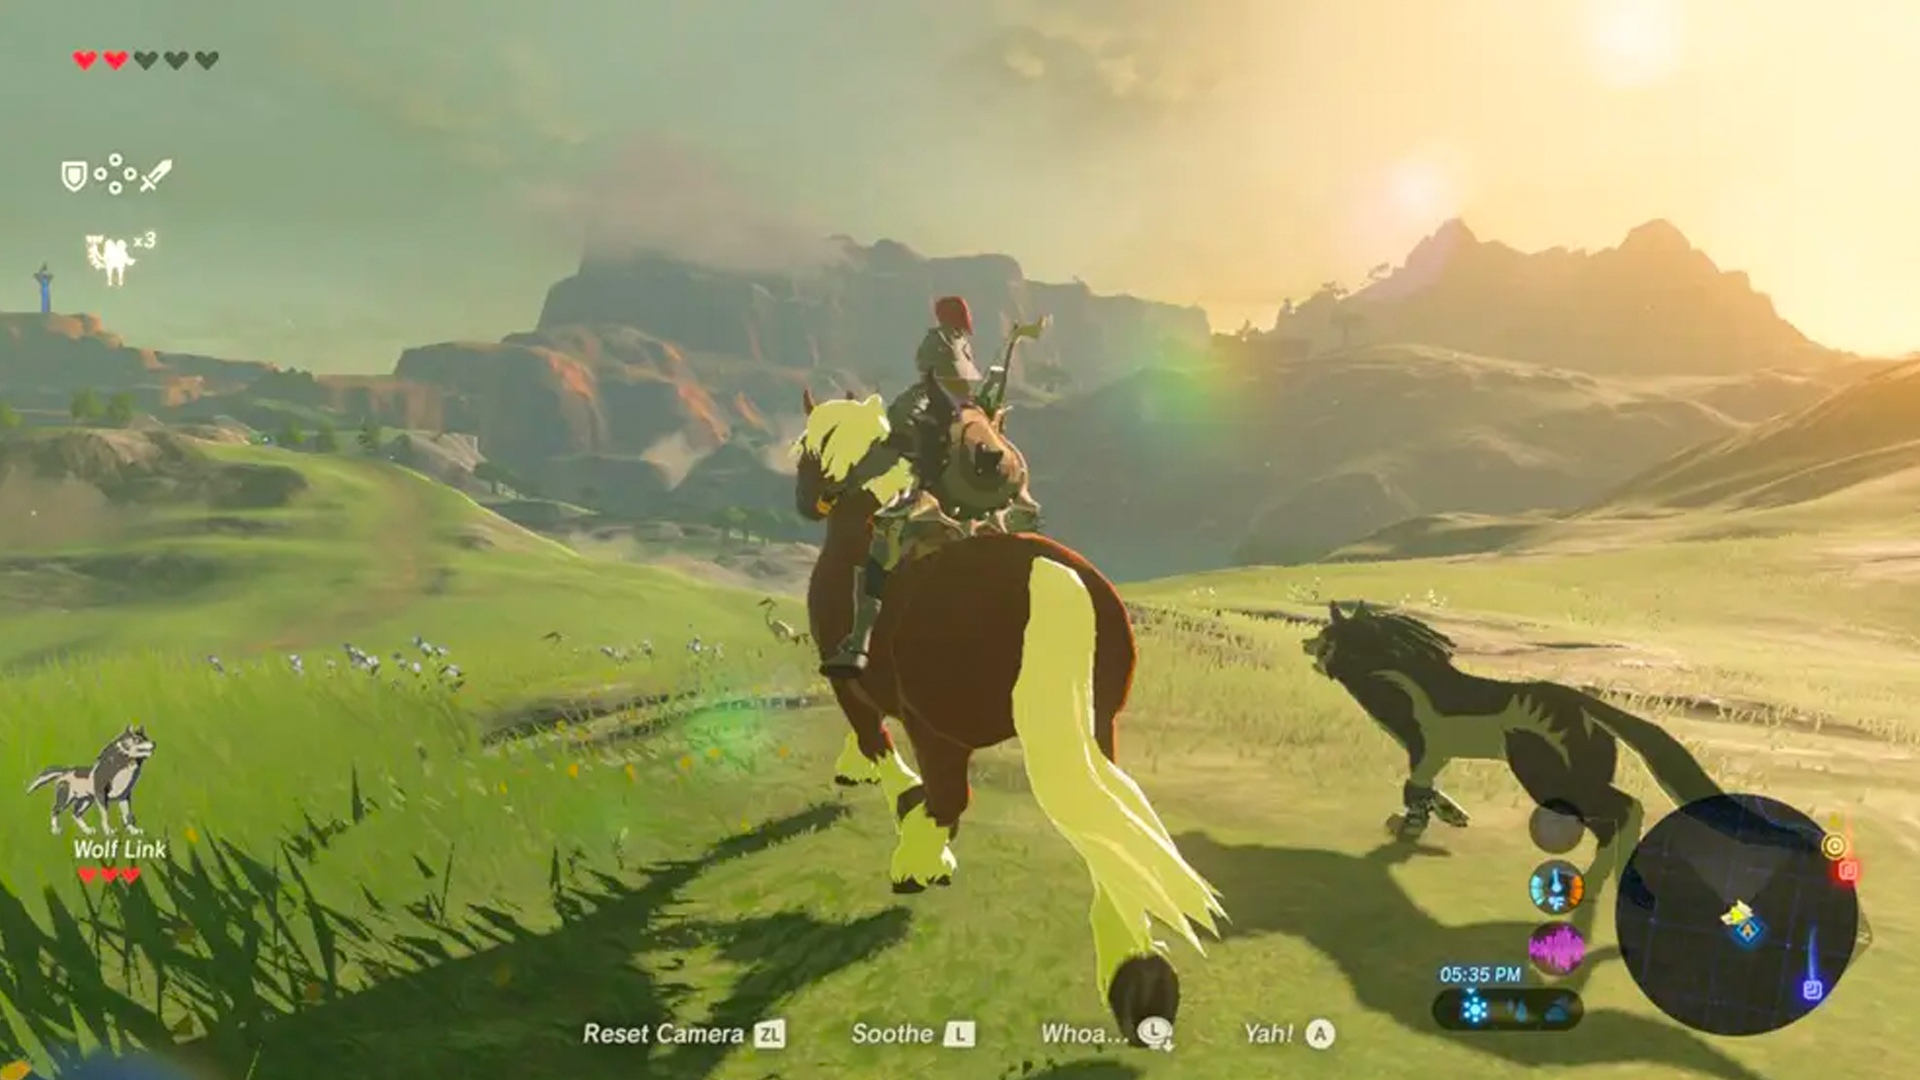 The Legend of Zelda: Breath of the Wild is “Video Game of the Year